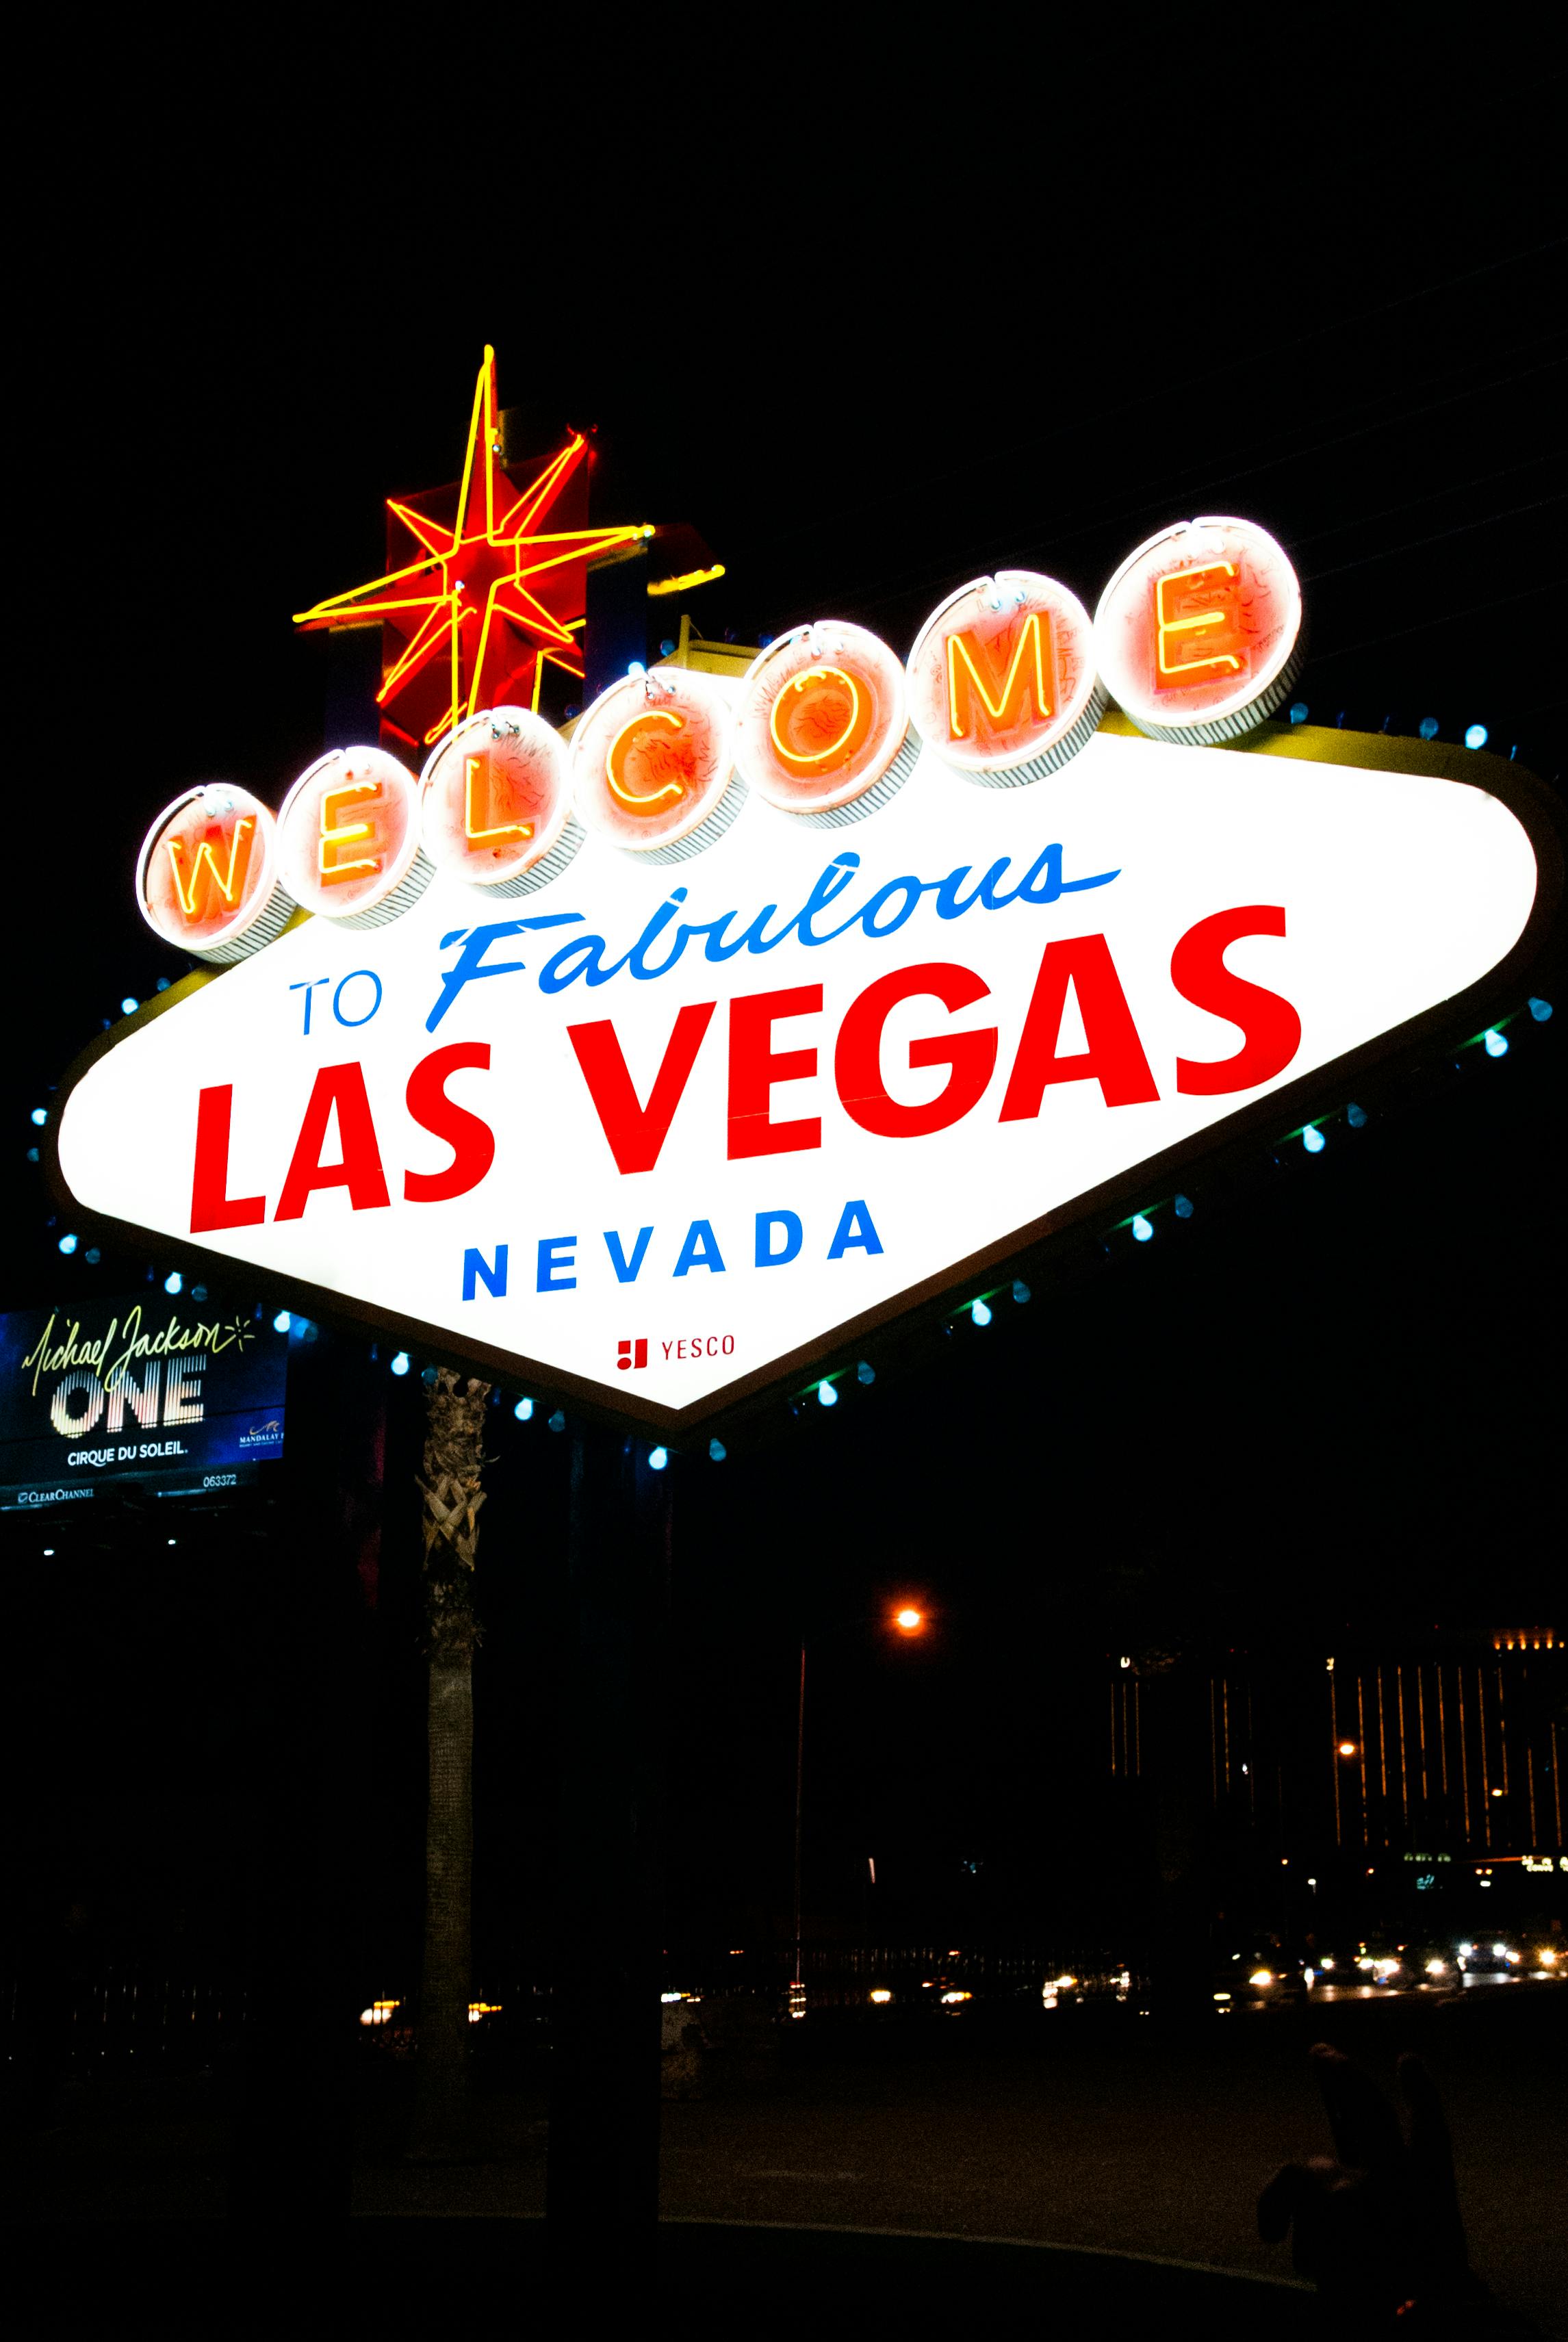 WELCOME TO FABULOUS LAS VEGAS LIGHTED LED SIGN 